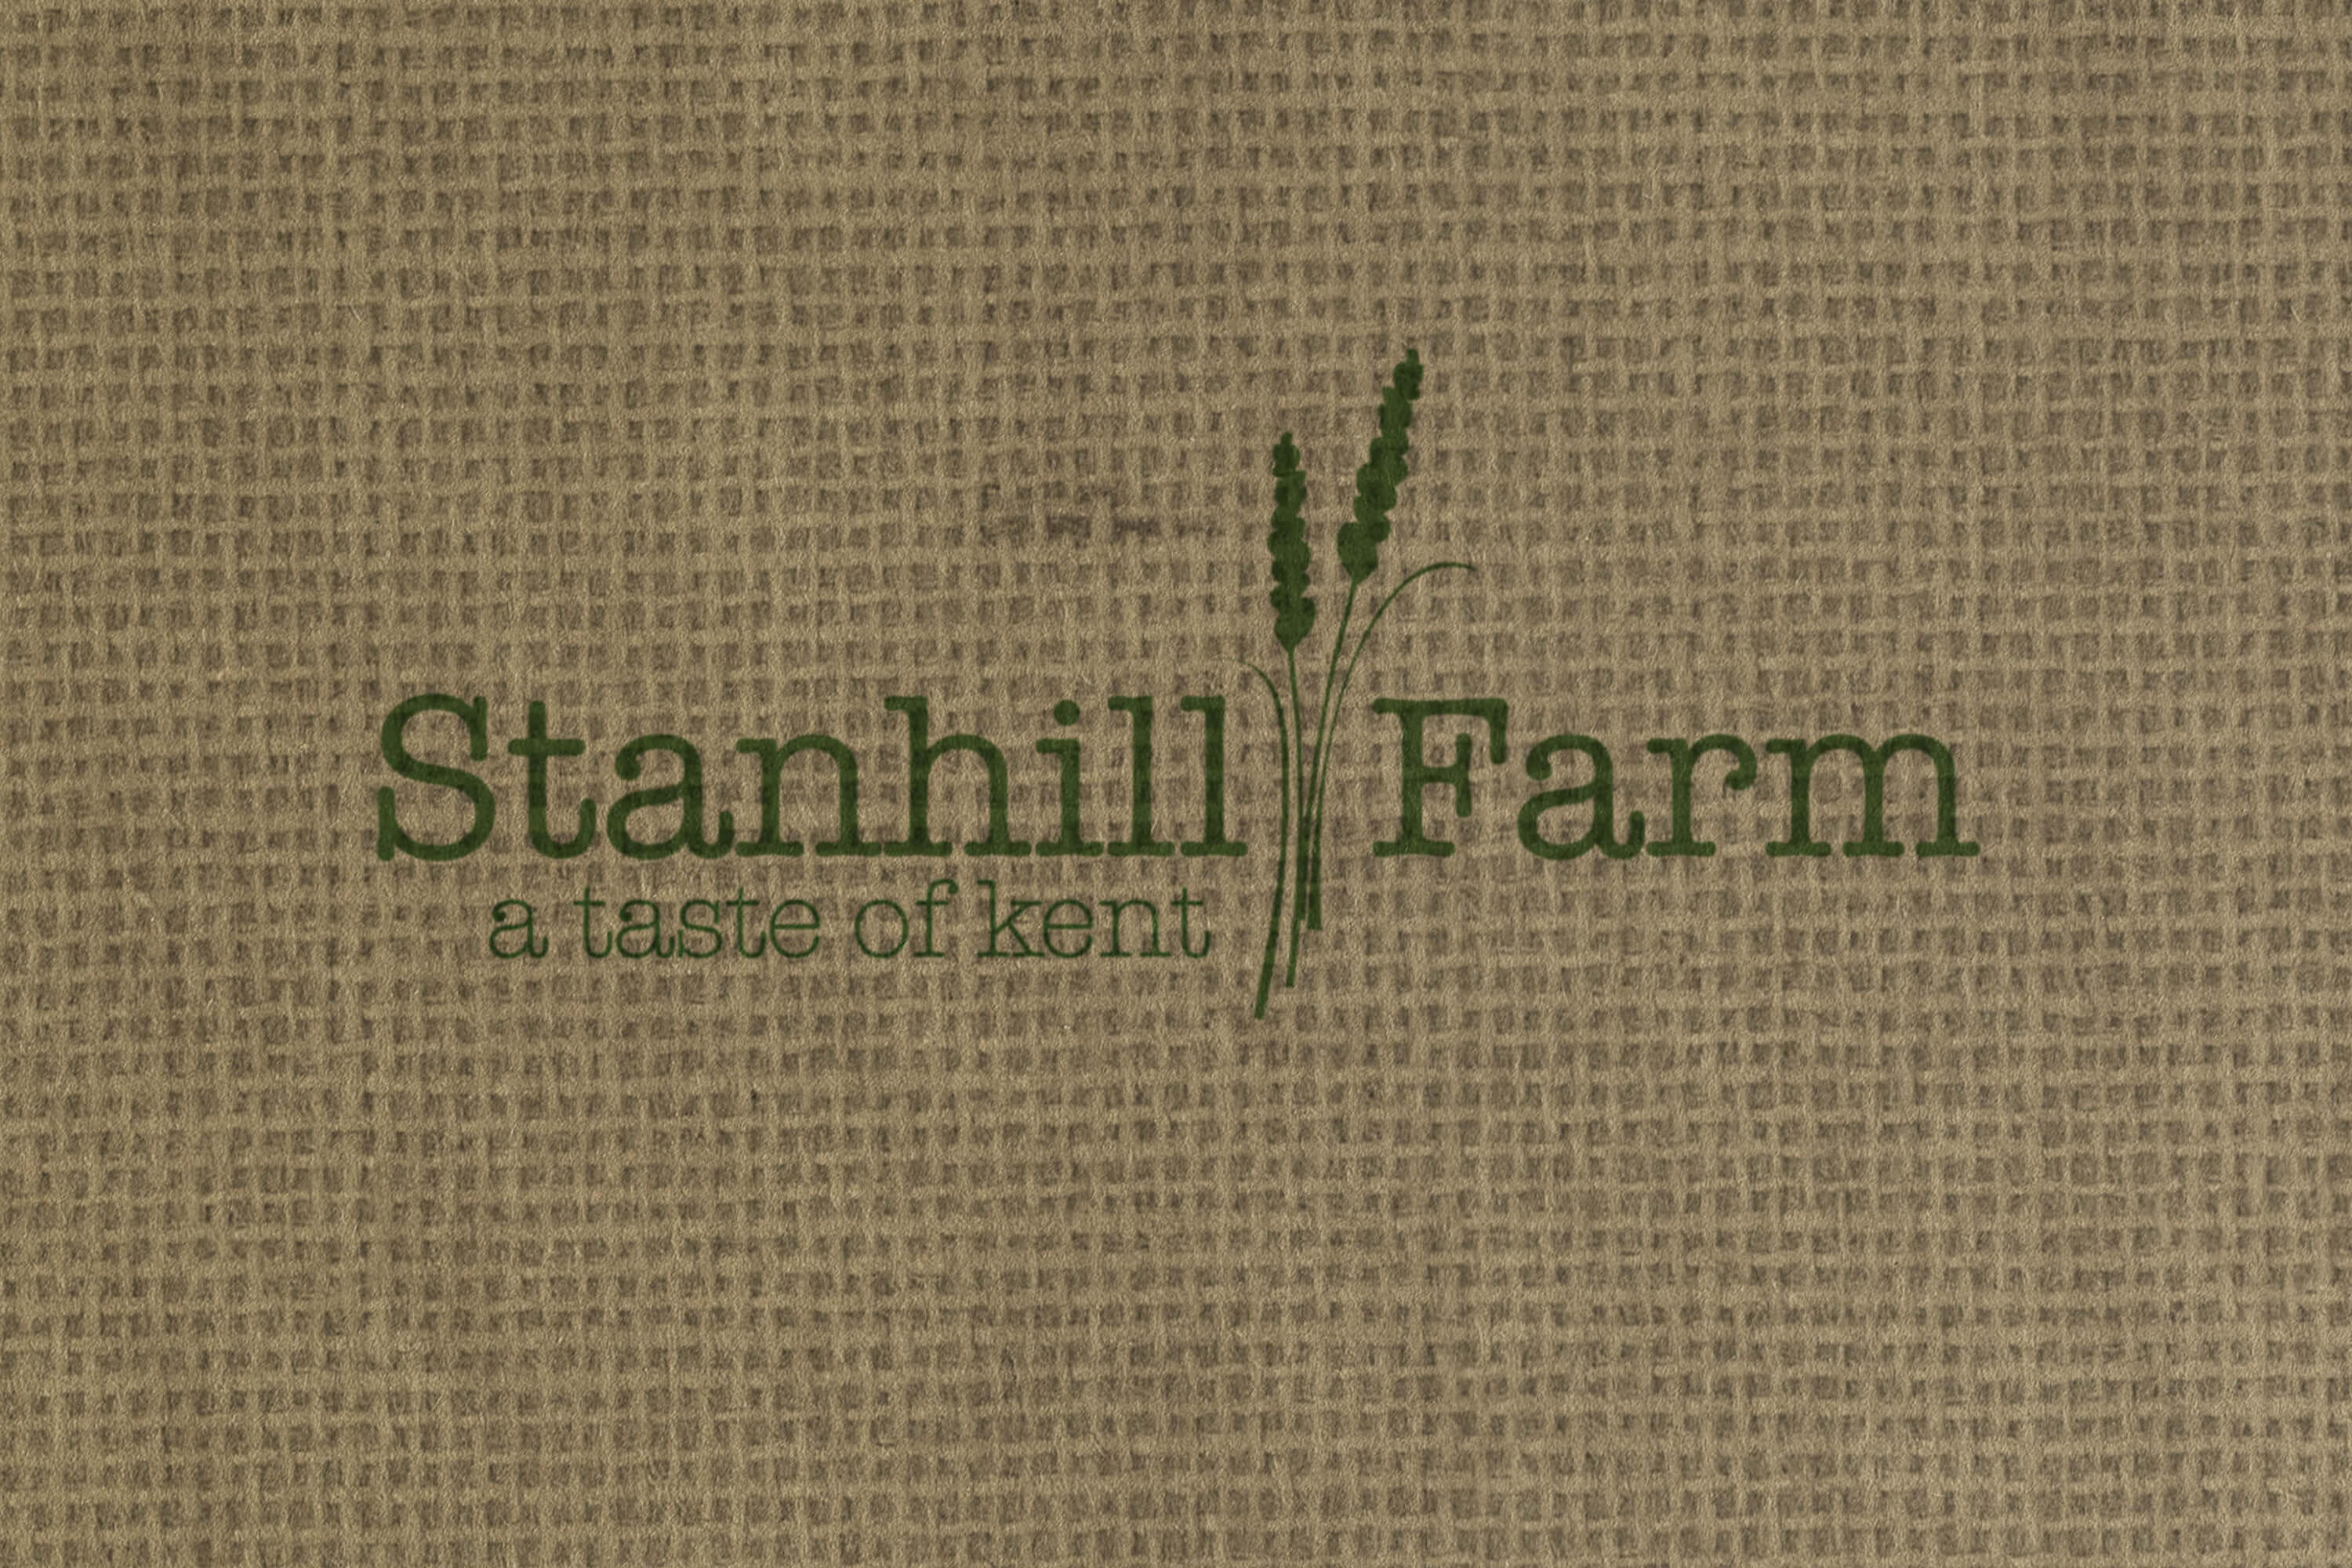 Stanhill Farm logo design printed on a hessian background